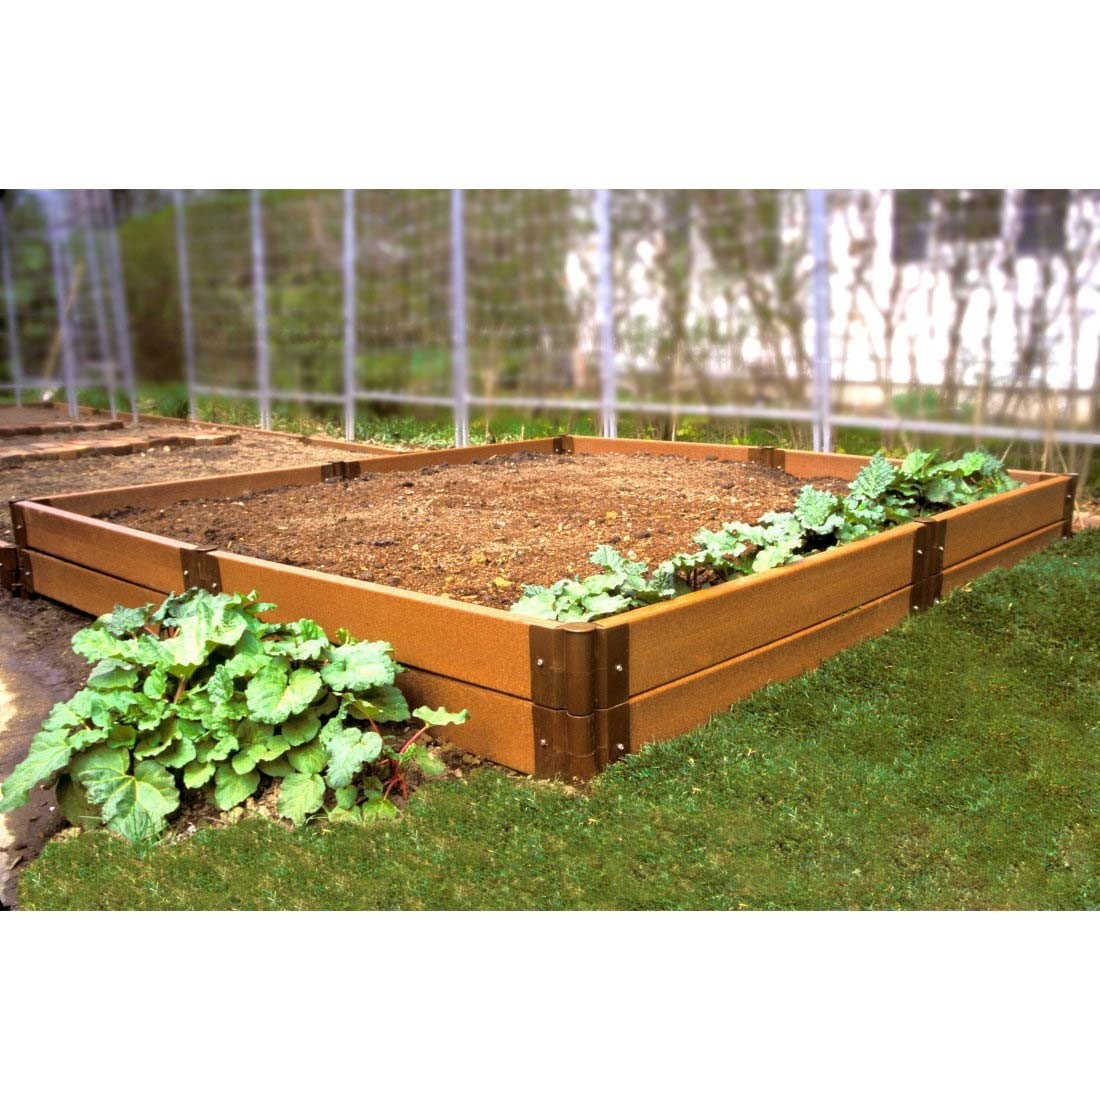 Raised Garden Beds Ideas for Growing Images